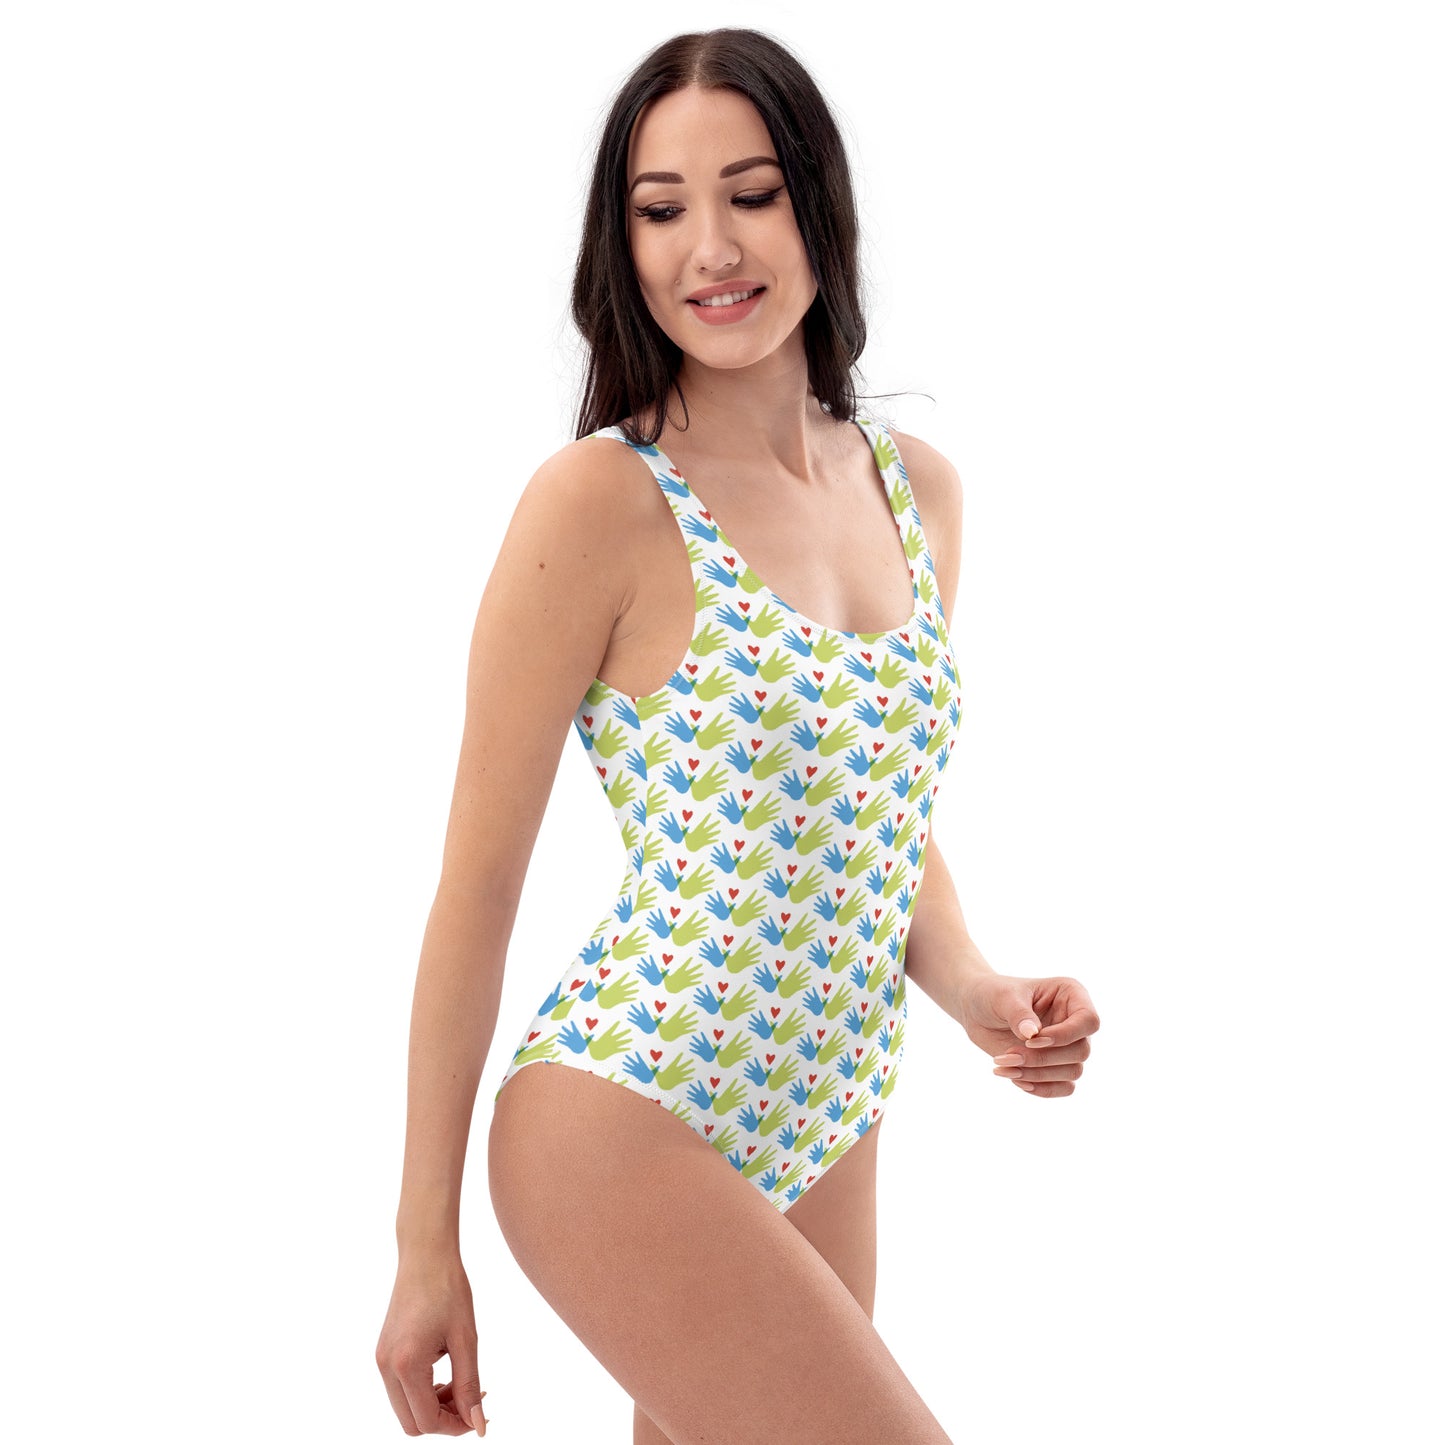 Williams Syndrome Association — One-Piece Swimsuit